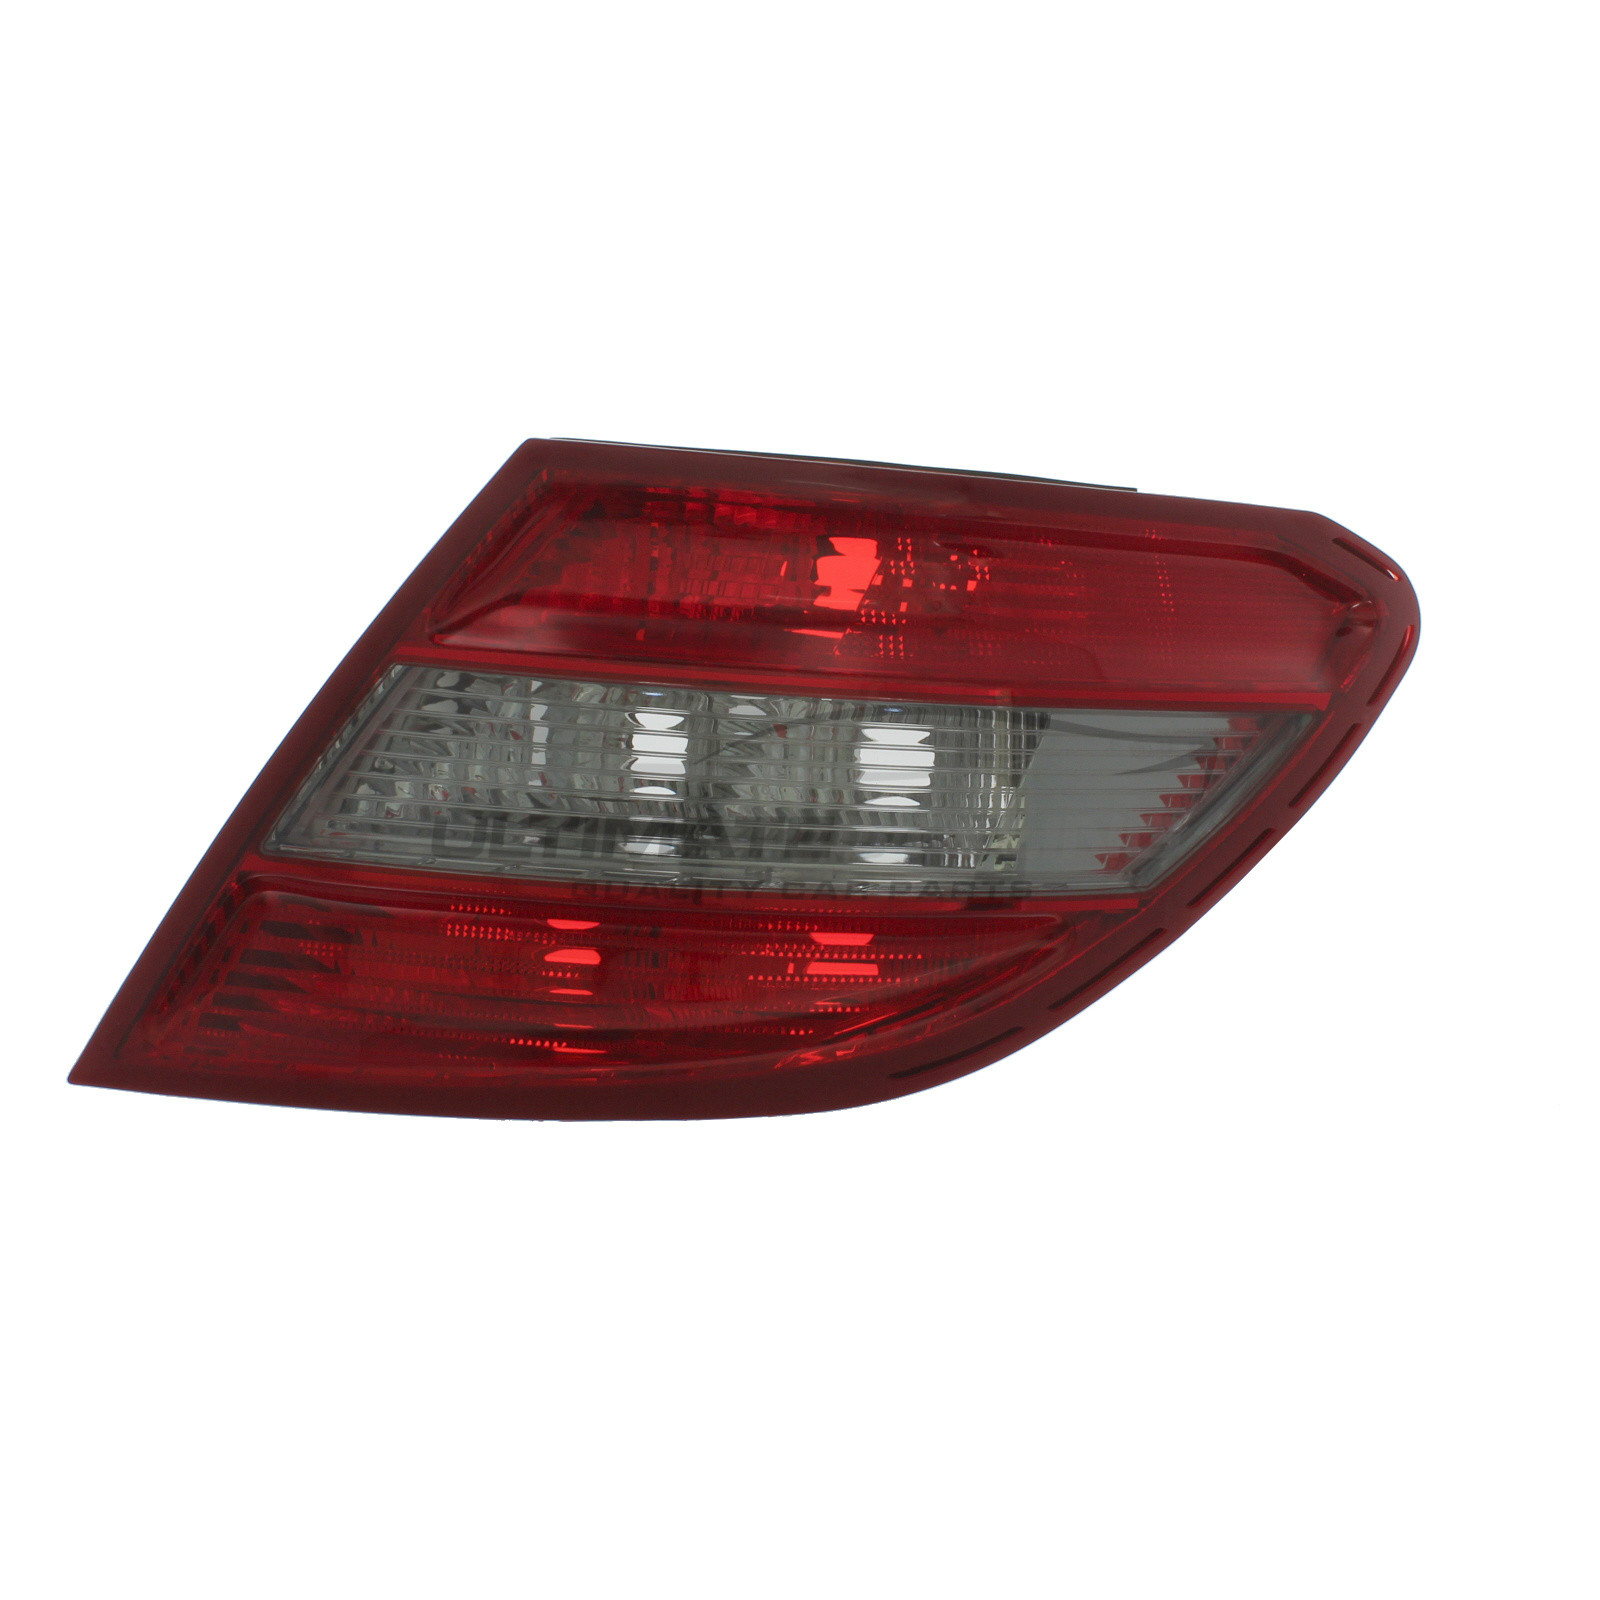 Mercedes Benz C Class 2007-2011 Non-LED with Smoked Indicator Rear Light / Tail Light Excluding Bulb Holder Drivers Side (RH)